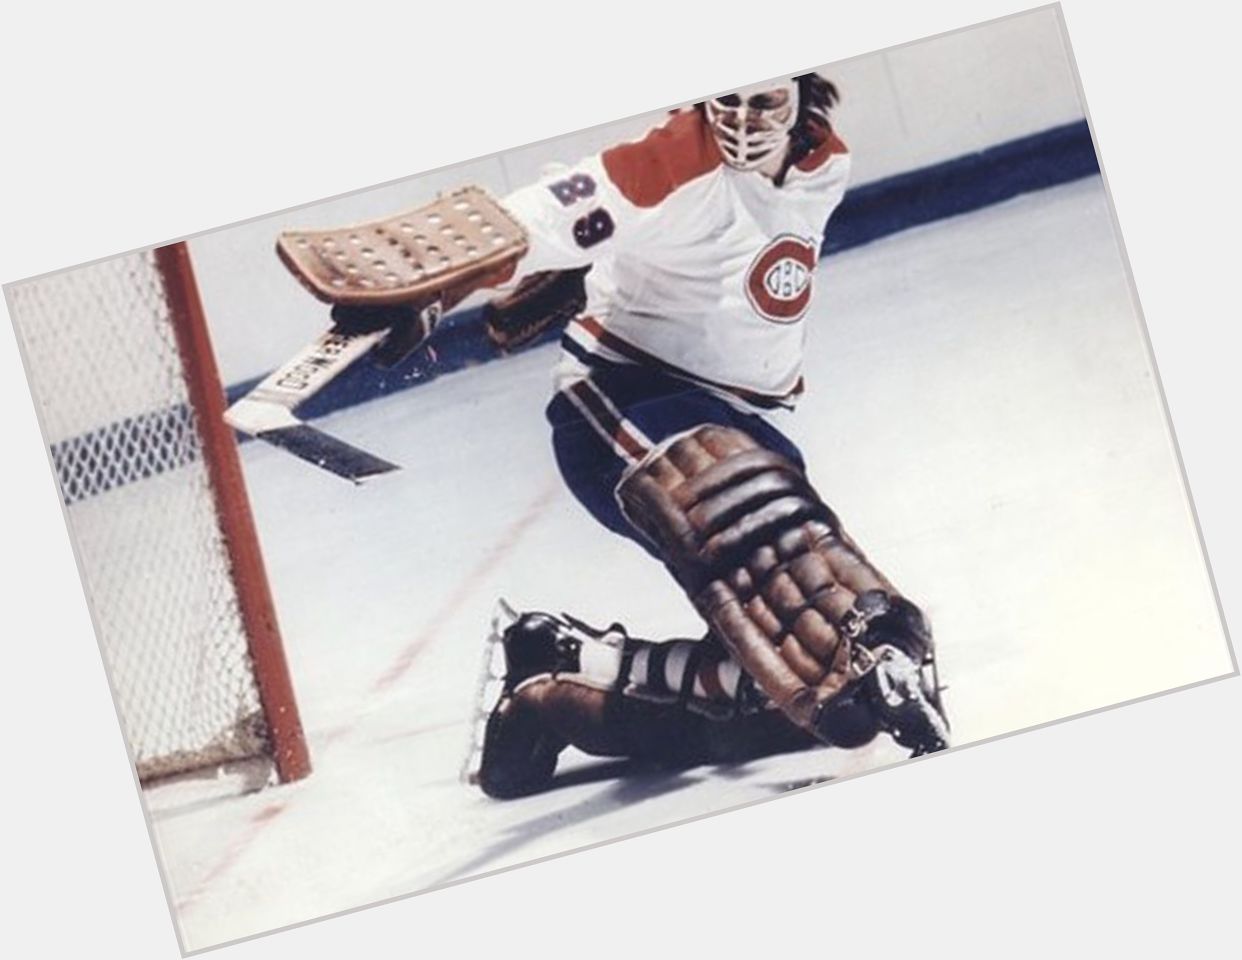 August 8, 1947: HAPPY BIRTHDAY to hockey great, author and advocate for the people. Ken Dryden. WhoHoo, He\s No. 1! 